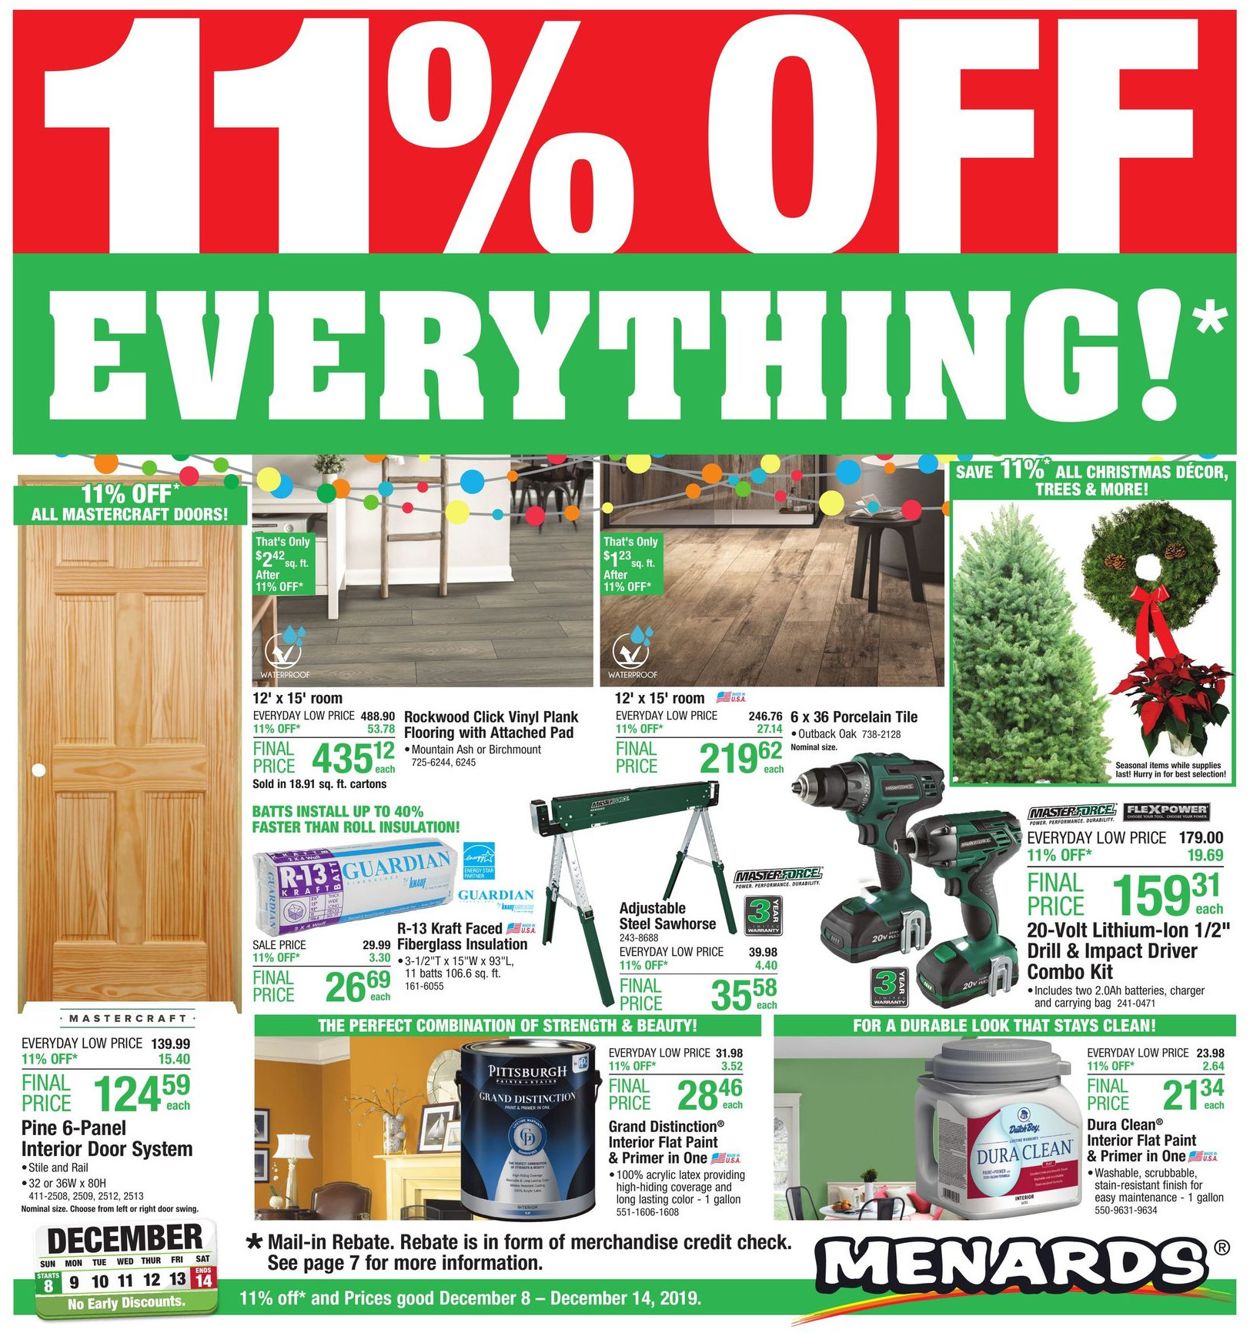 Menards - Holiday Ad 2019 Current weekly ad 12/08 - 12/14/2019 - www.neverfullmm.com